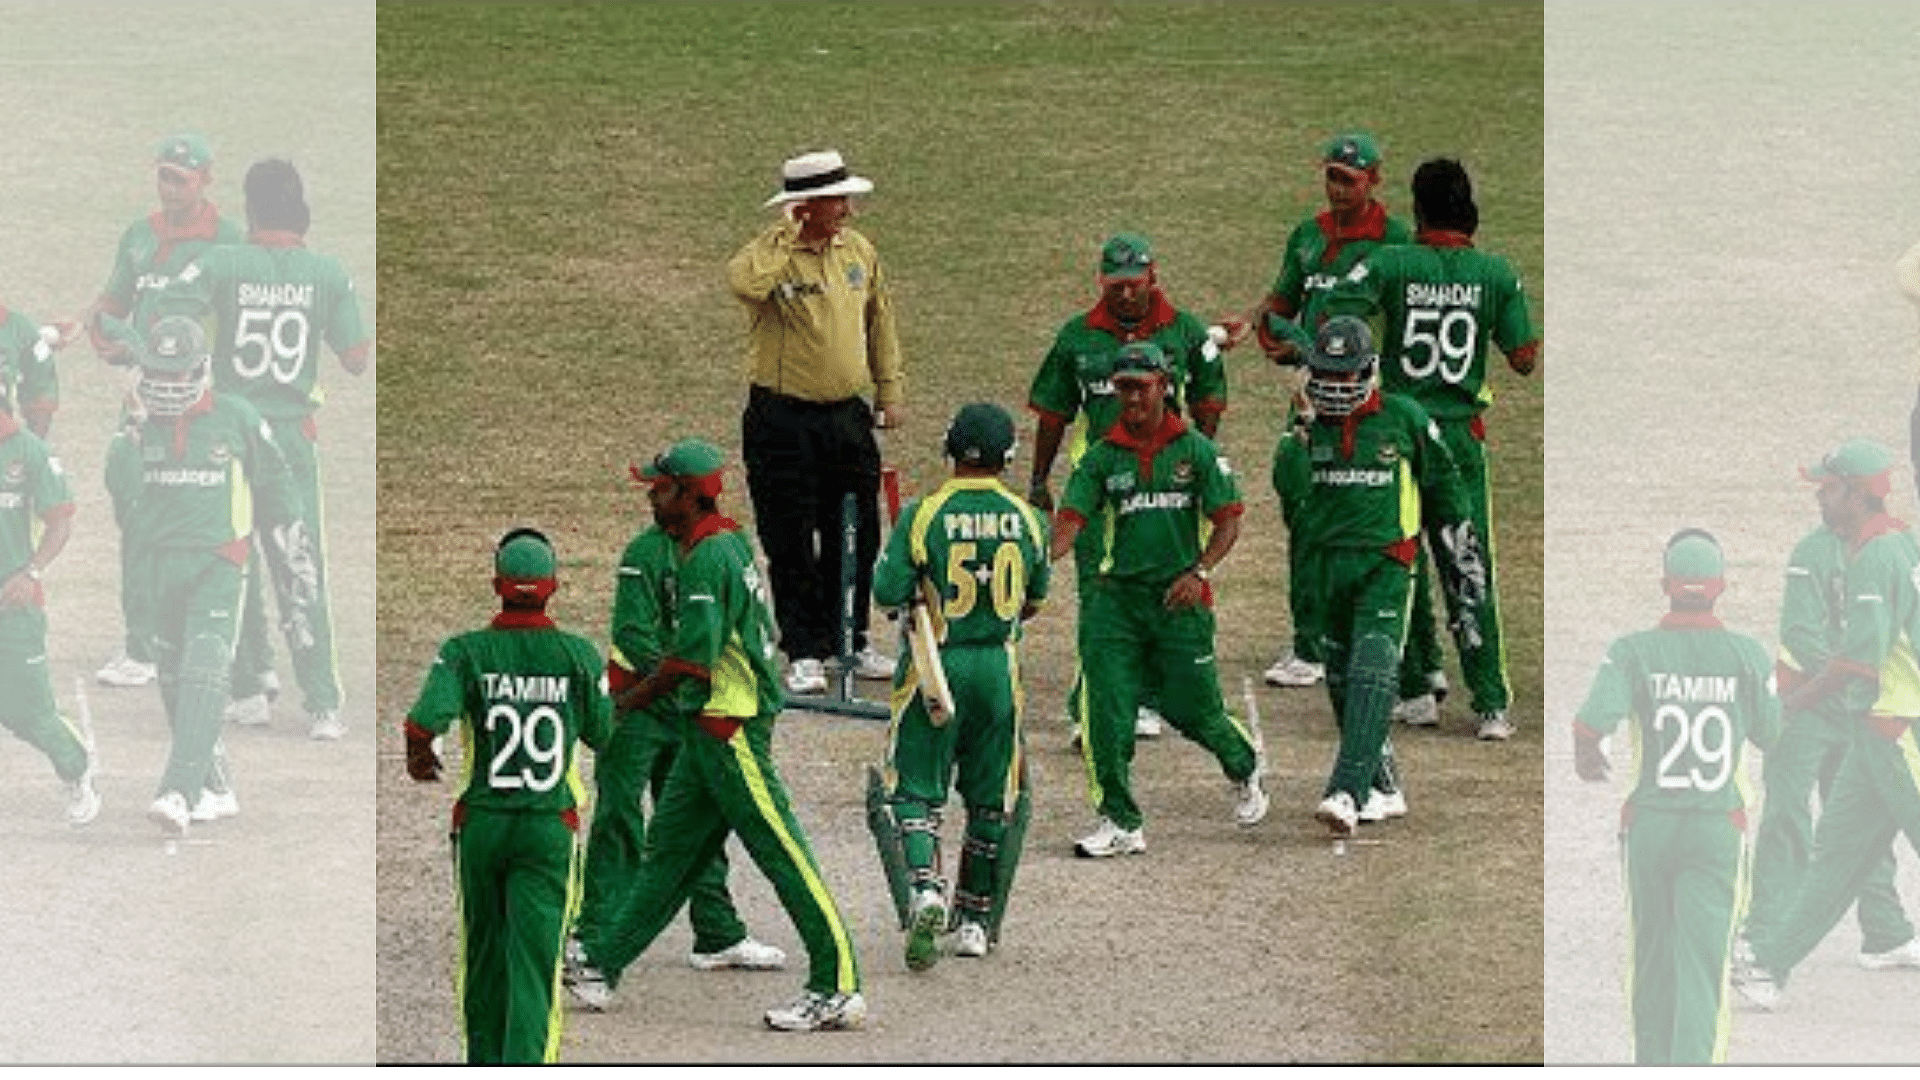 Bangladesh defeated South Africa in 2007 World Cup by 67 runs